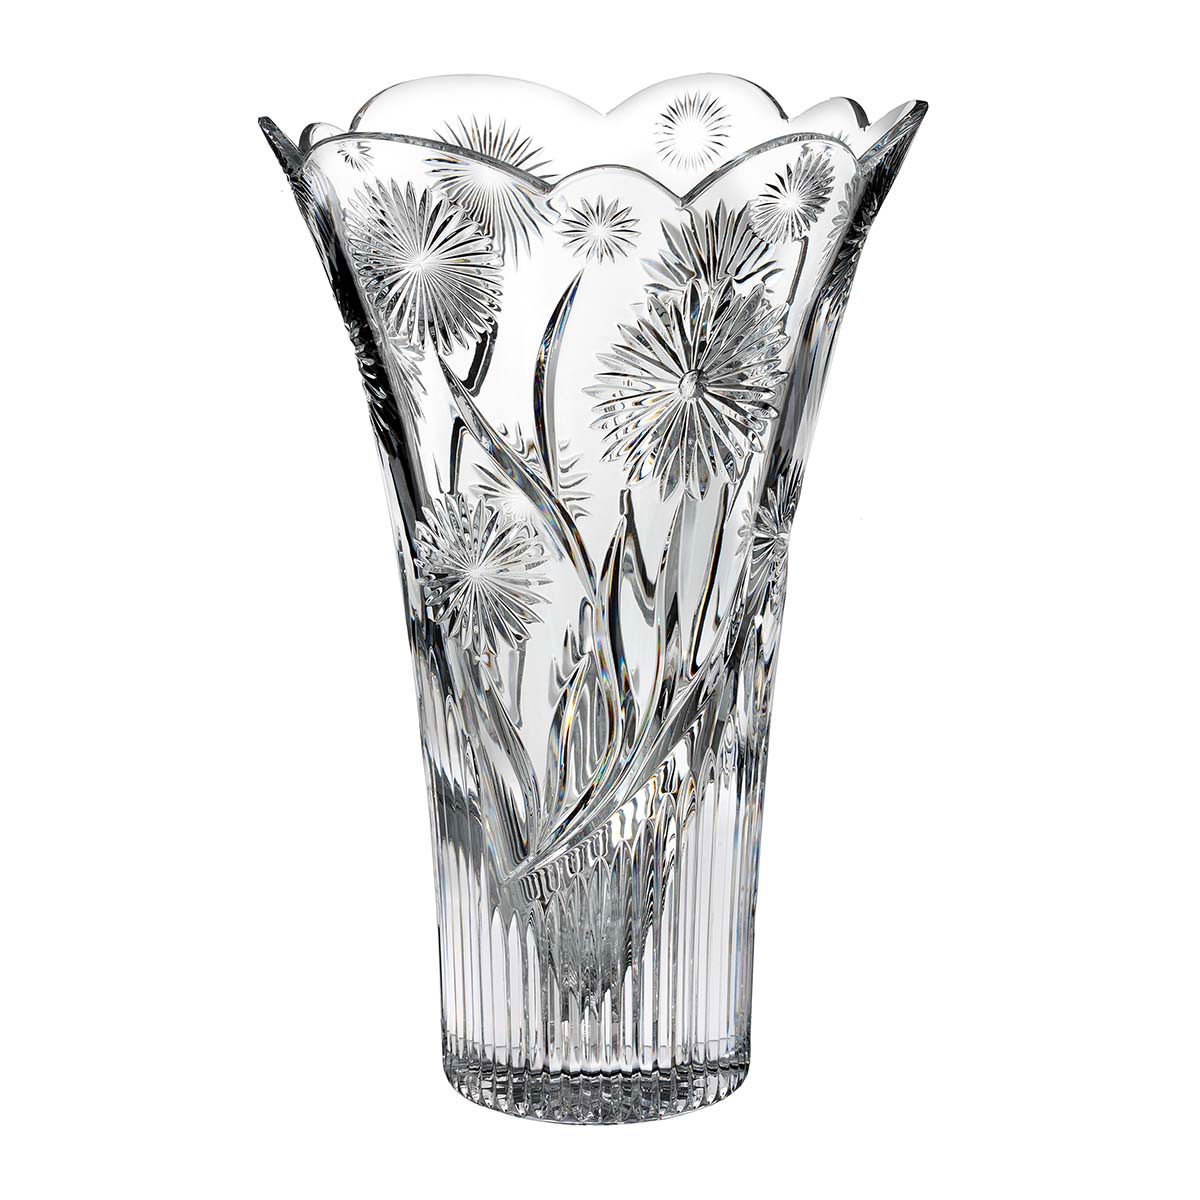 Waterford Crystal, House of Waterford Billy Briggs Daisy 12" Crystal Vase, Limited Edition of 400